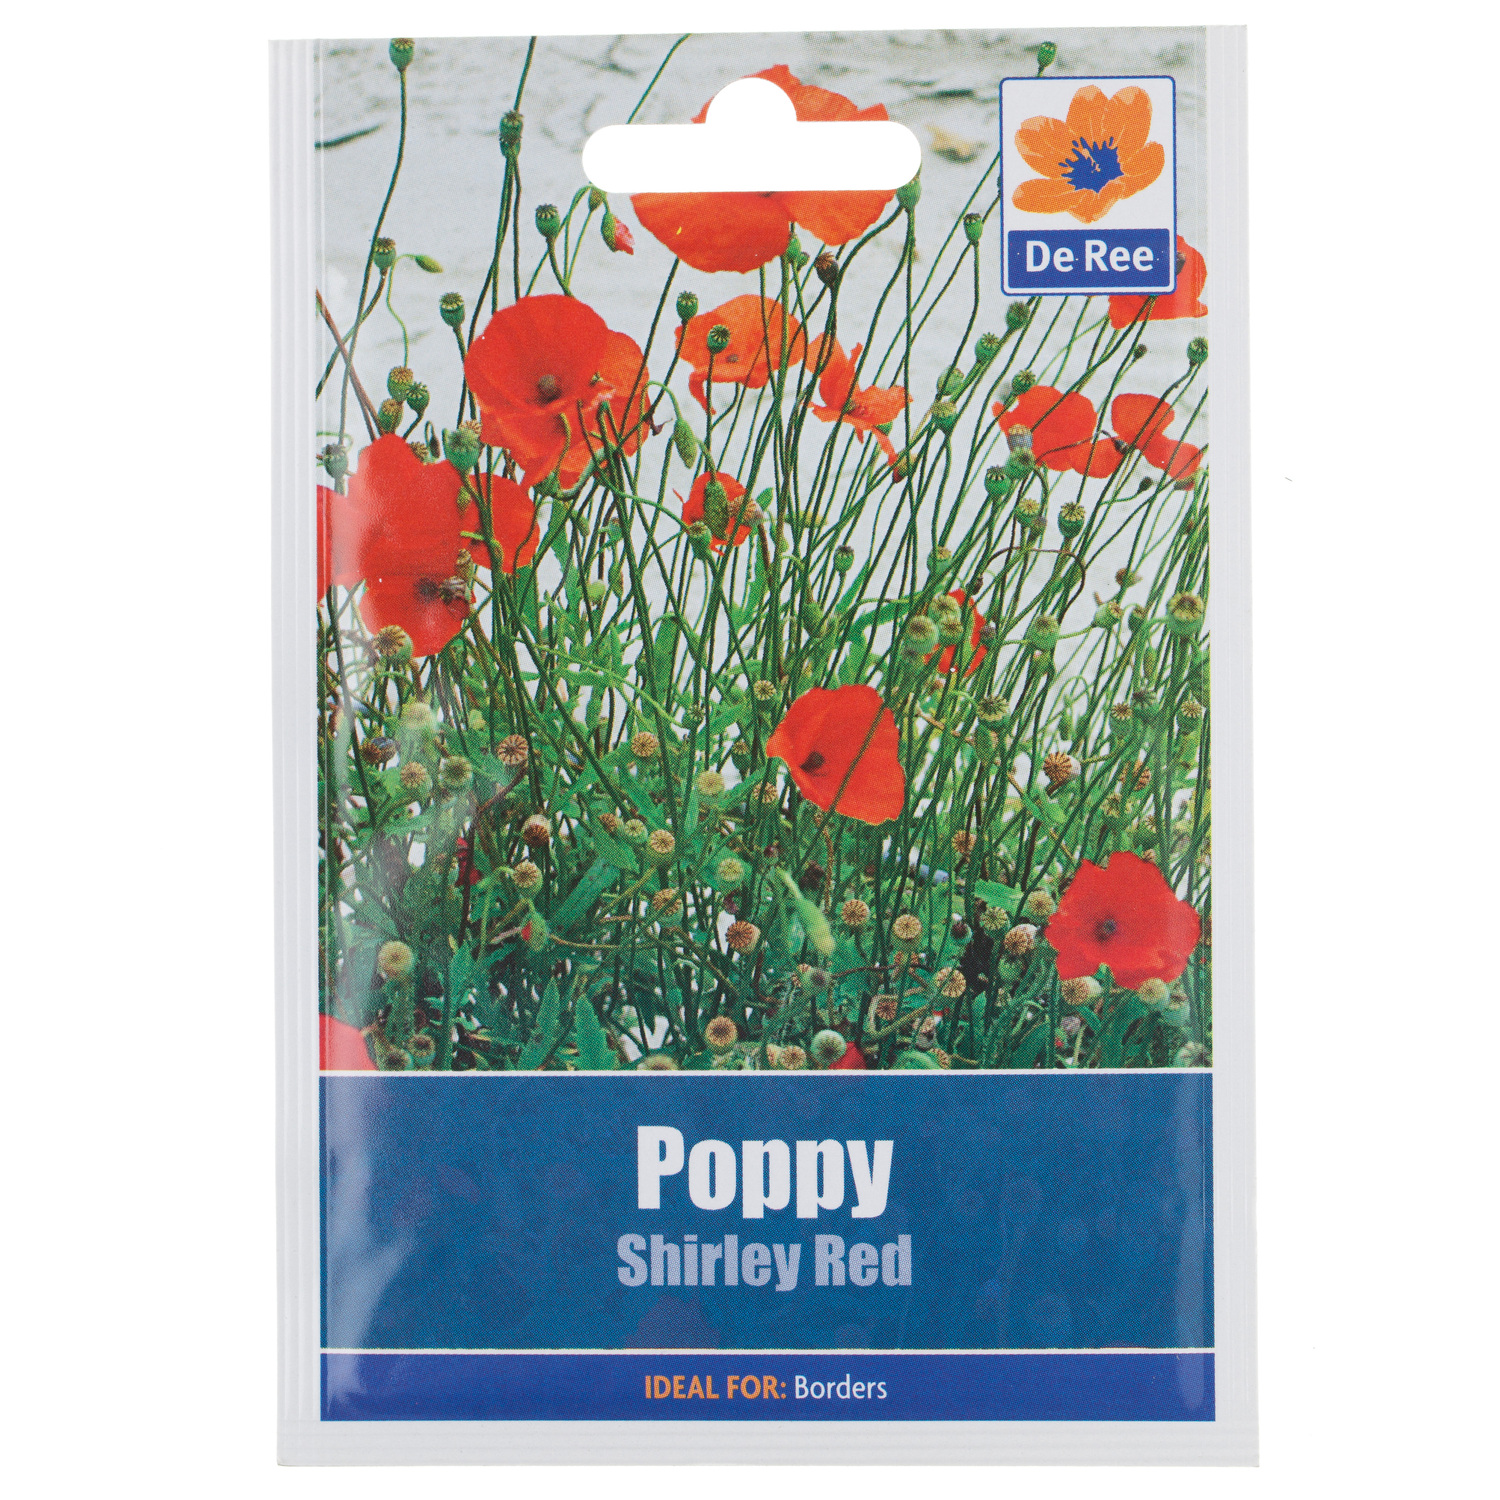 Poppy Shirley Red Seed Packet Image